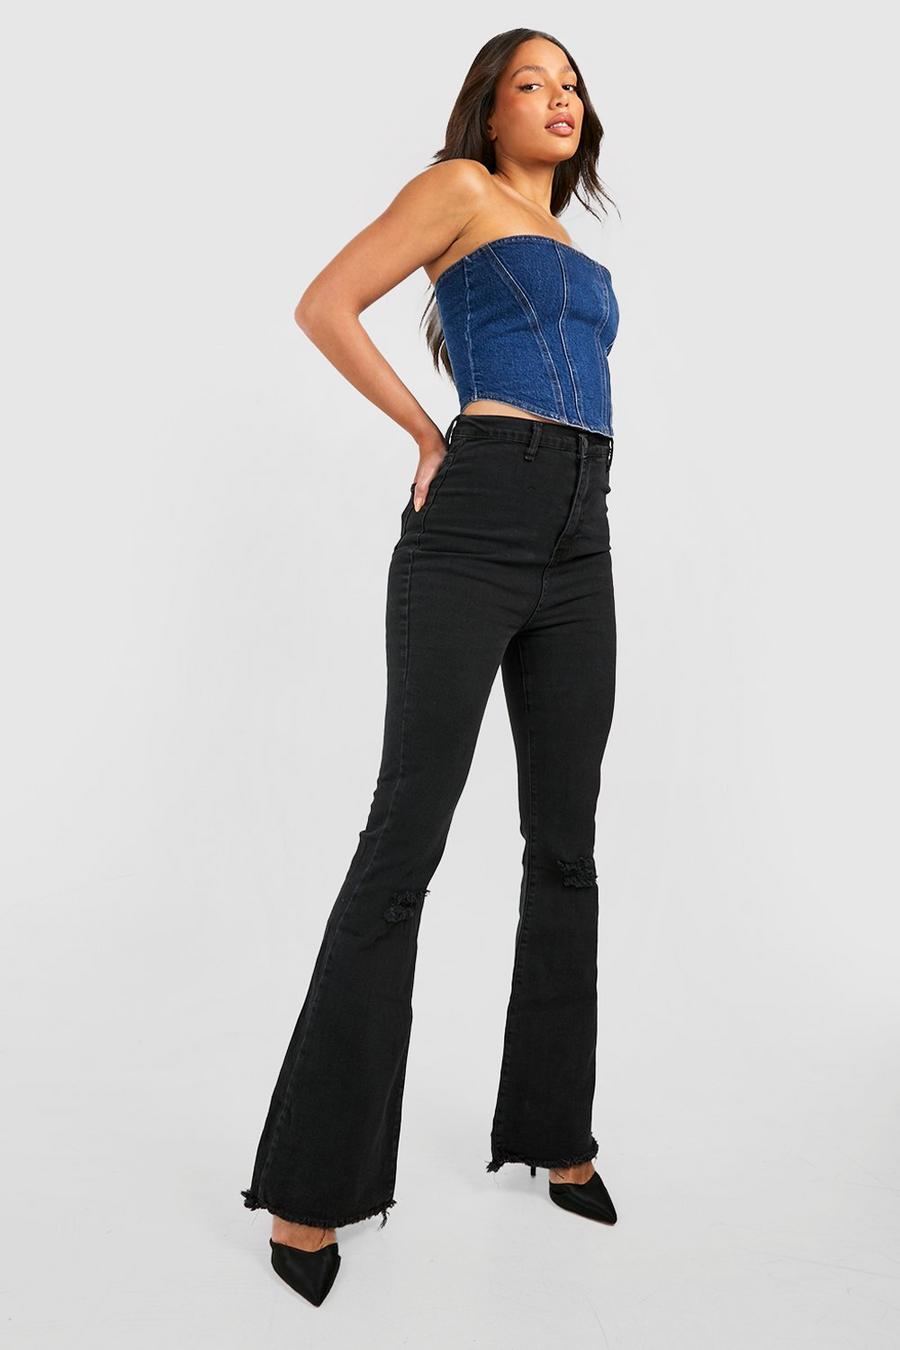 Black Tall High Waist Ripped Stretch Flare Jeans